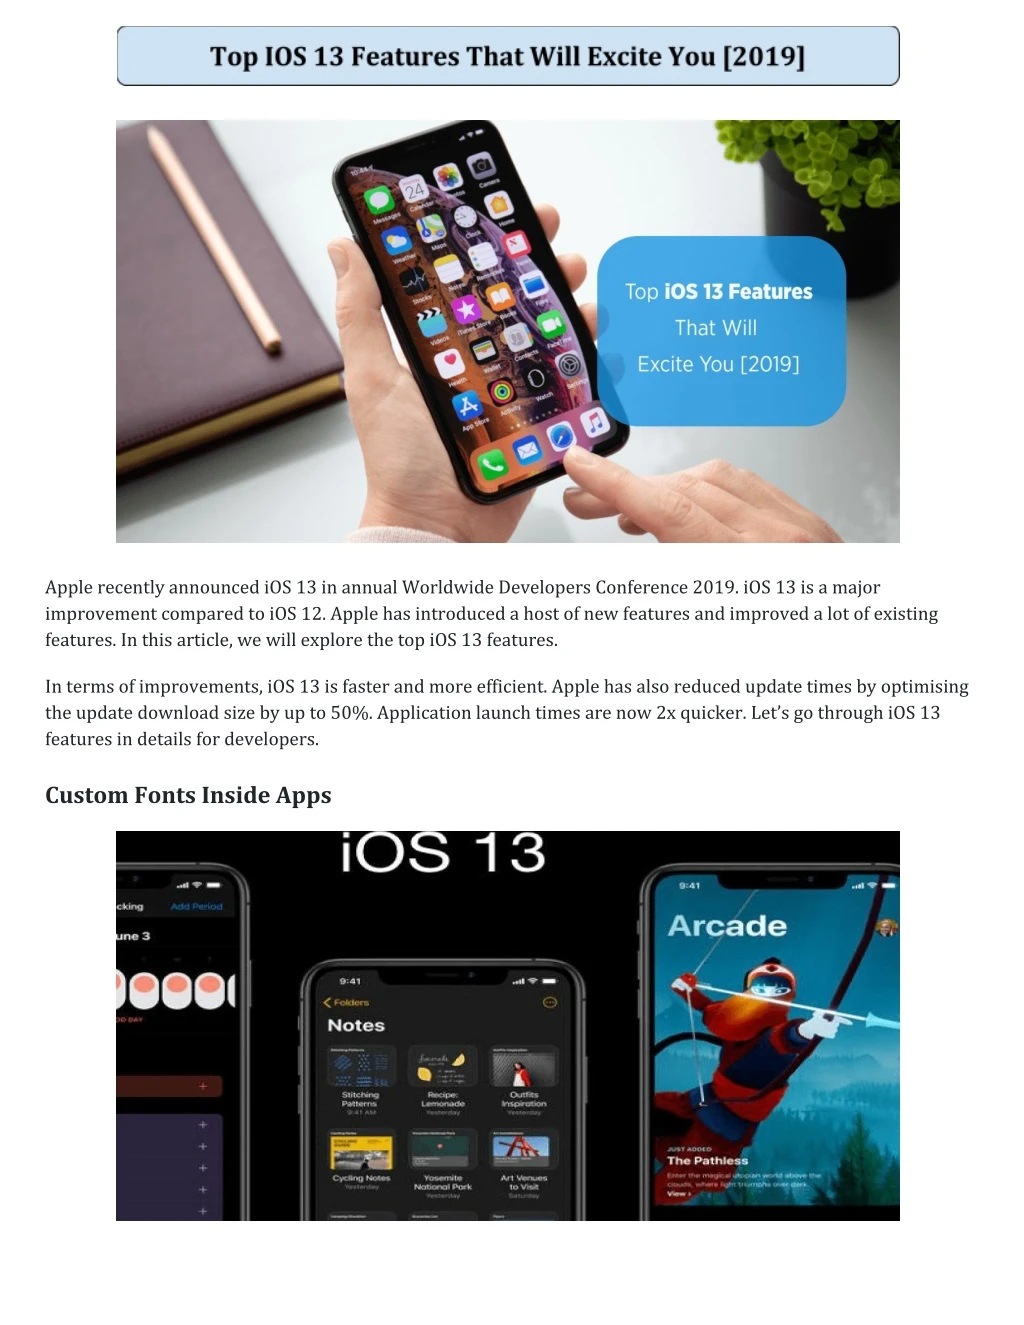 apple recently announced ios 13 in annual